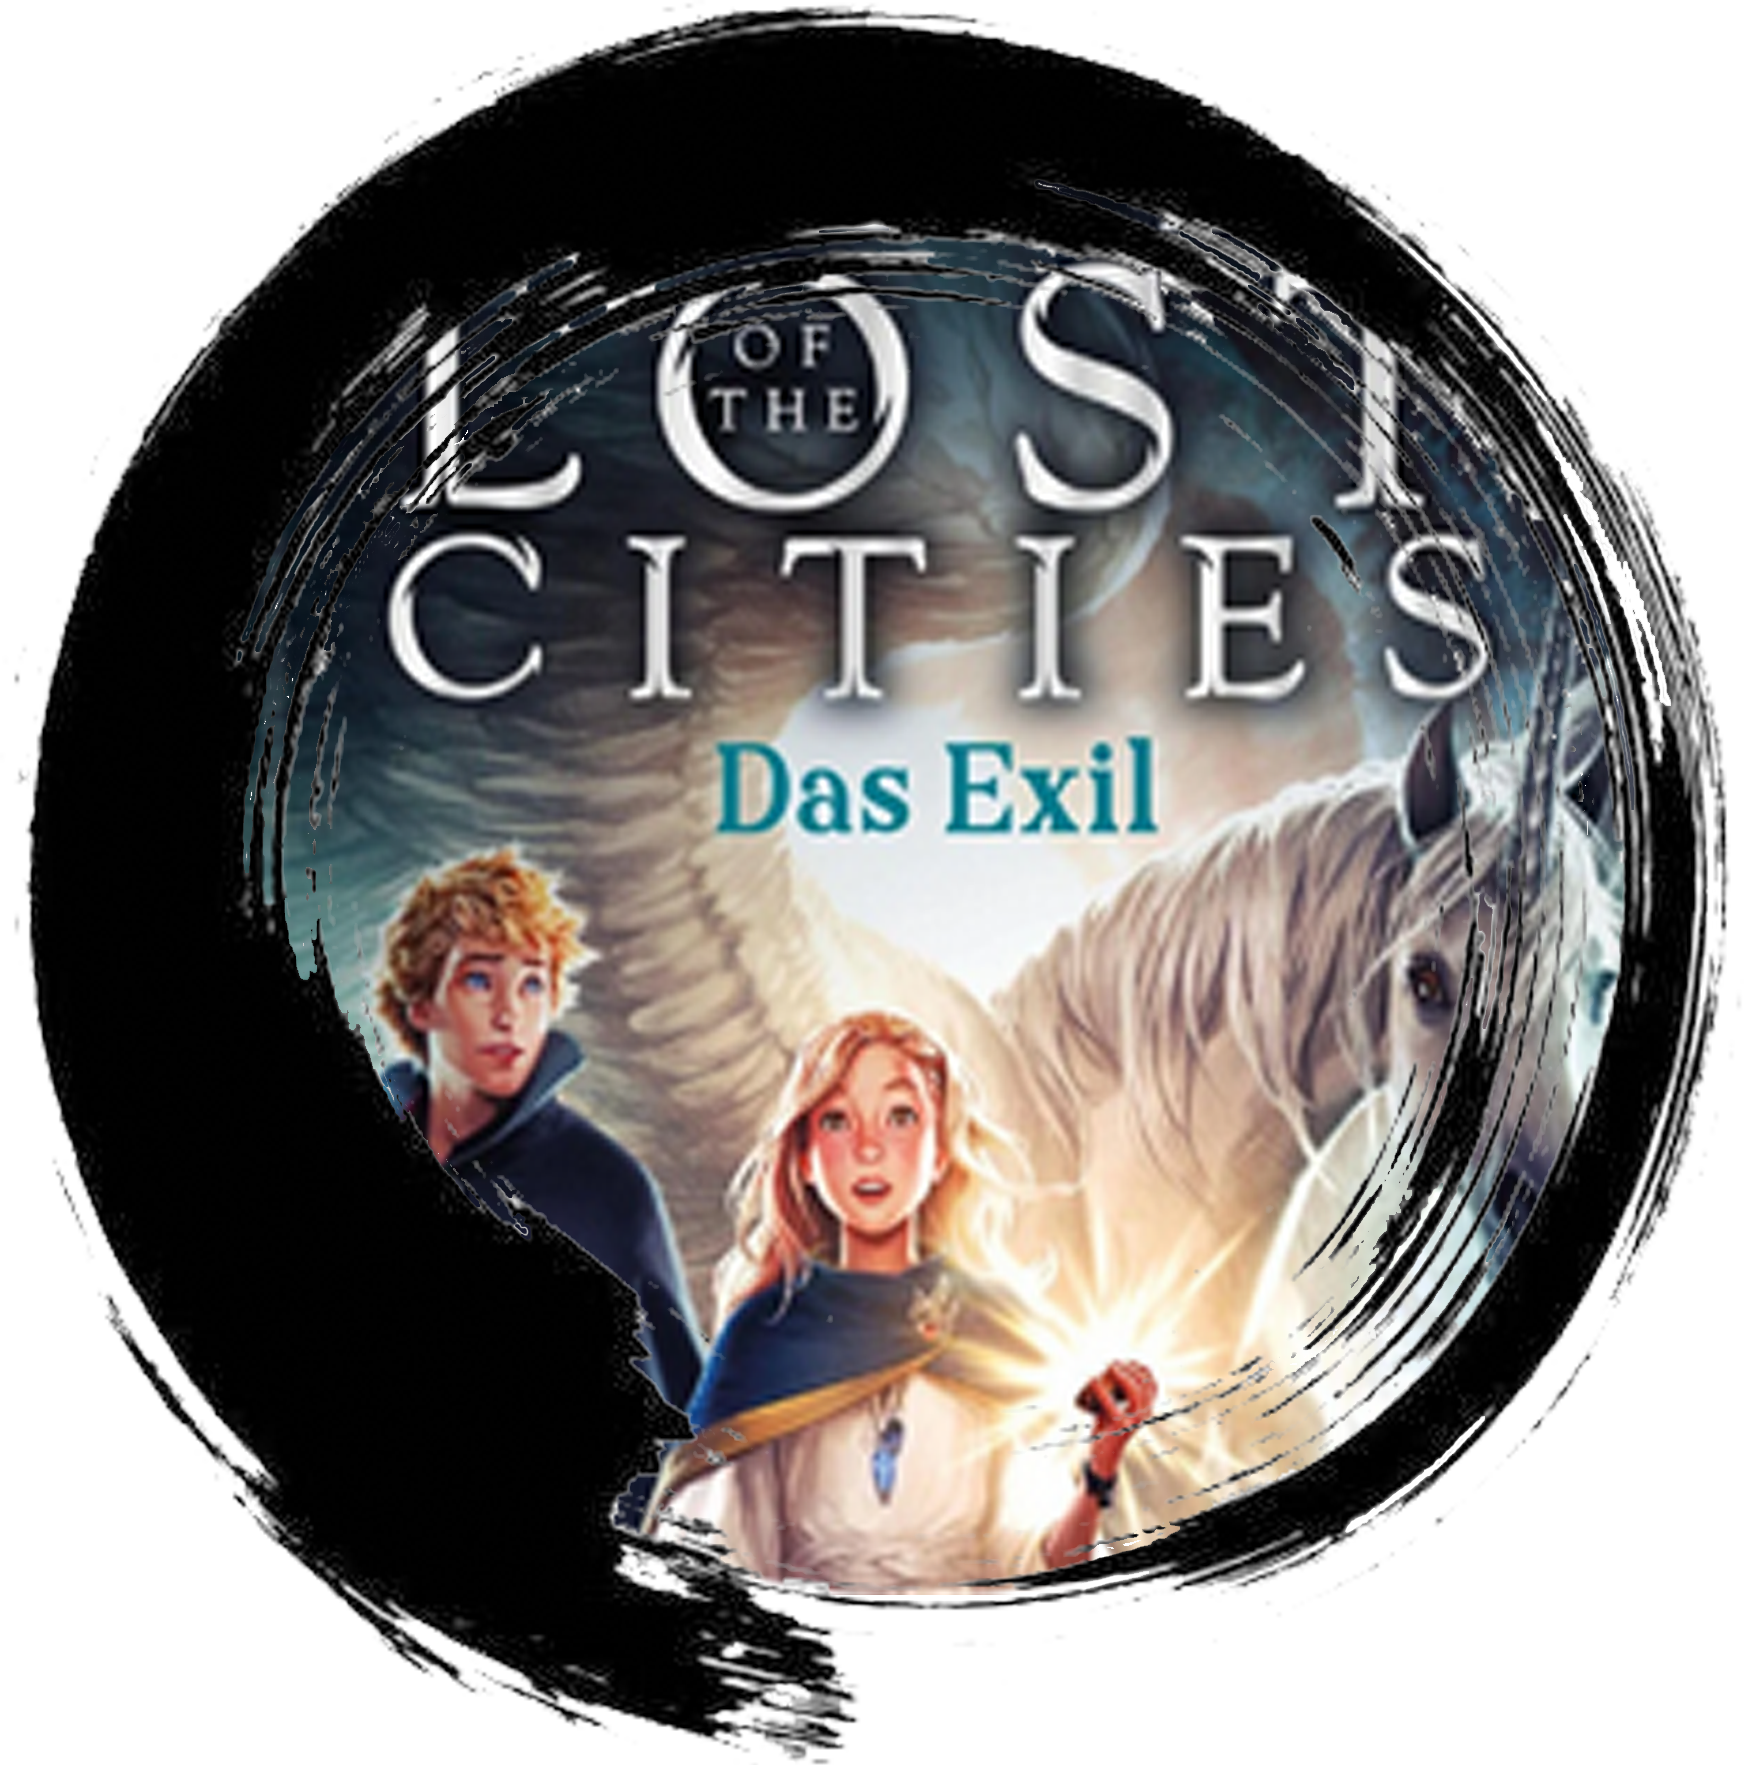 Keeper Lost of the Cities # 2 – Das Exil